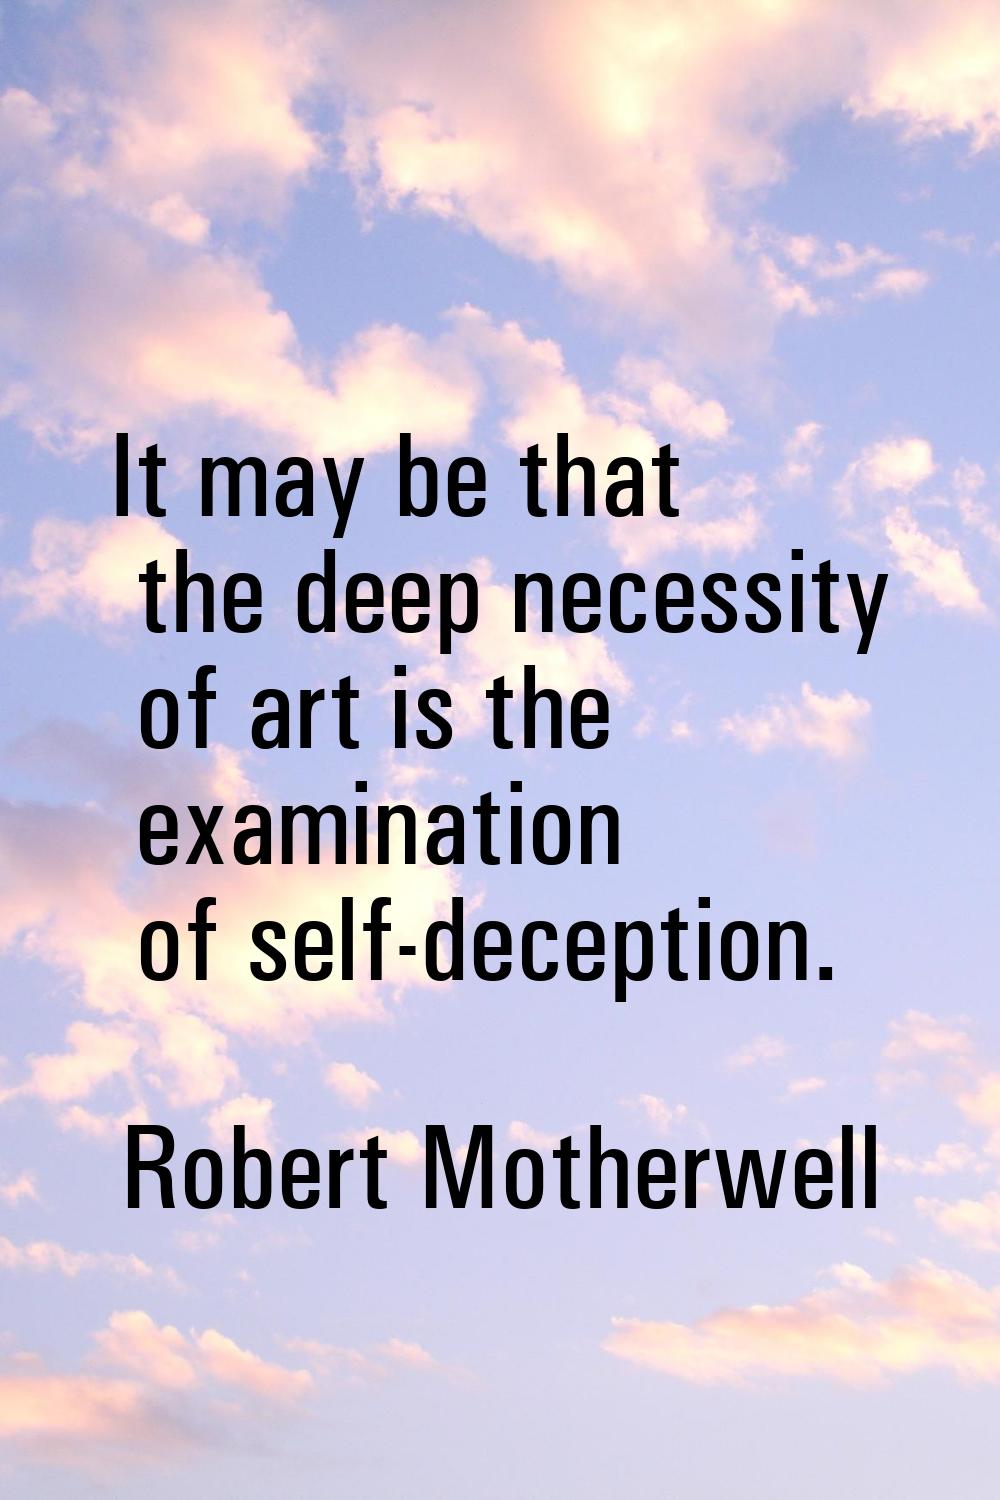 It may be that the deep necessity of art is the examination of self-deception.